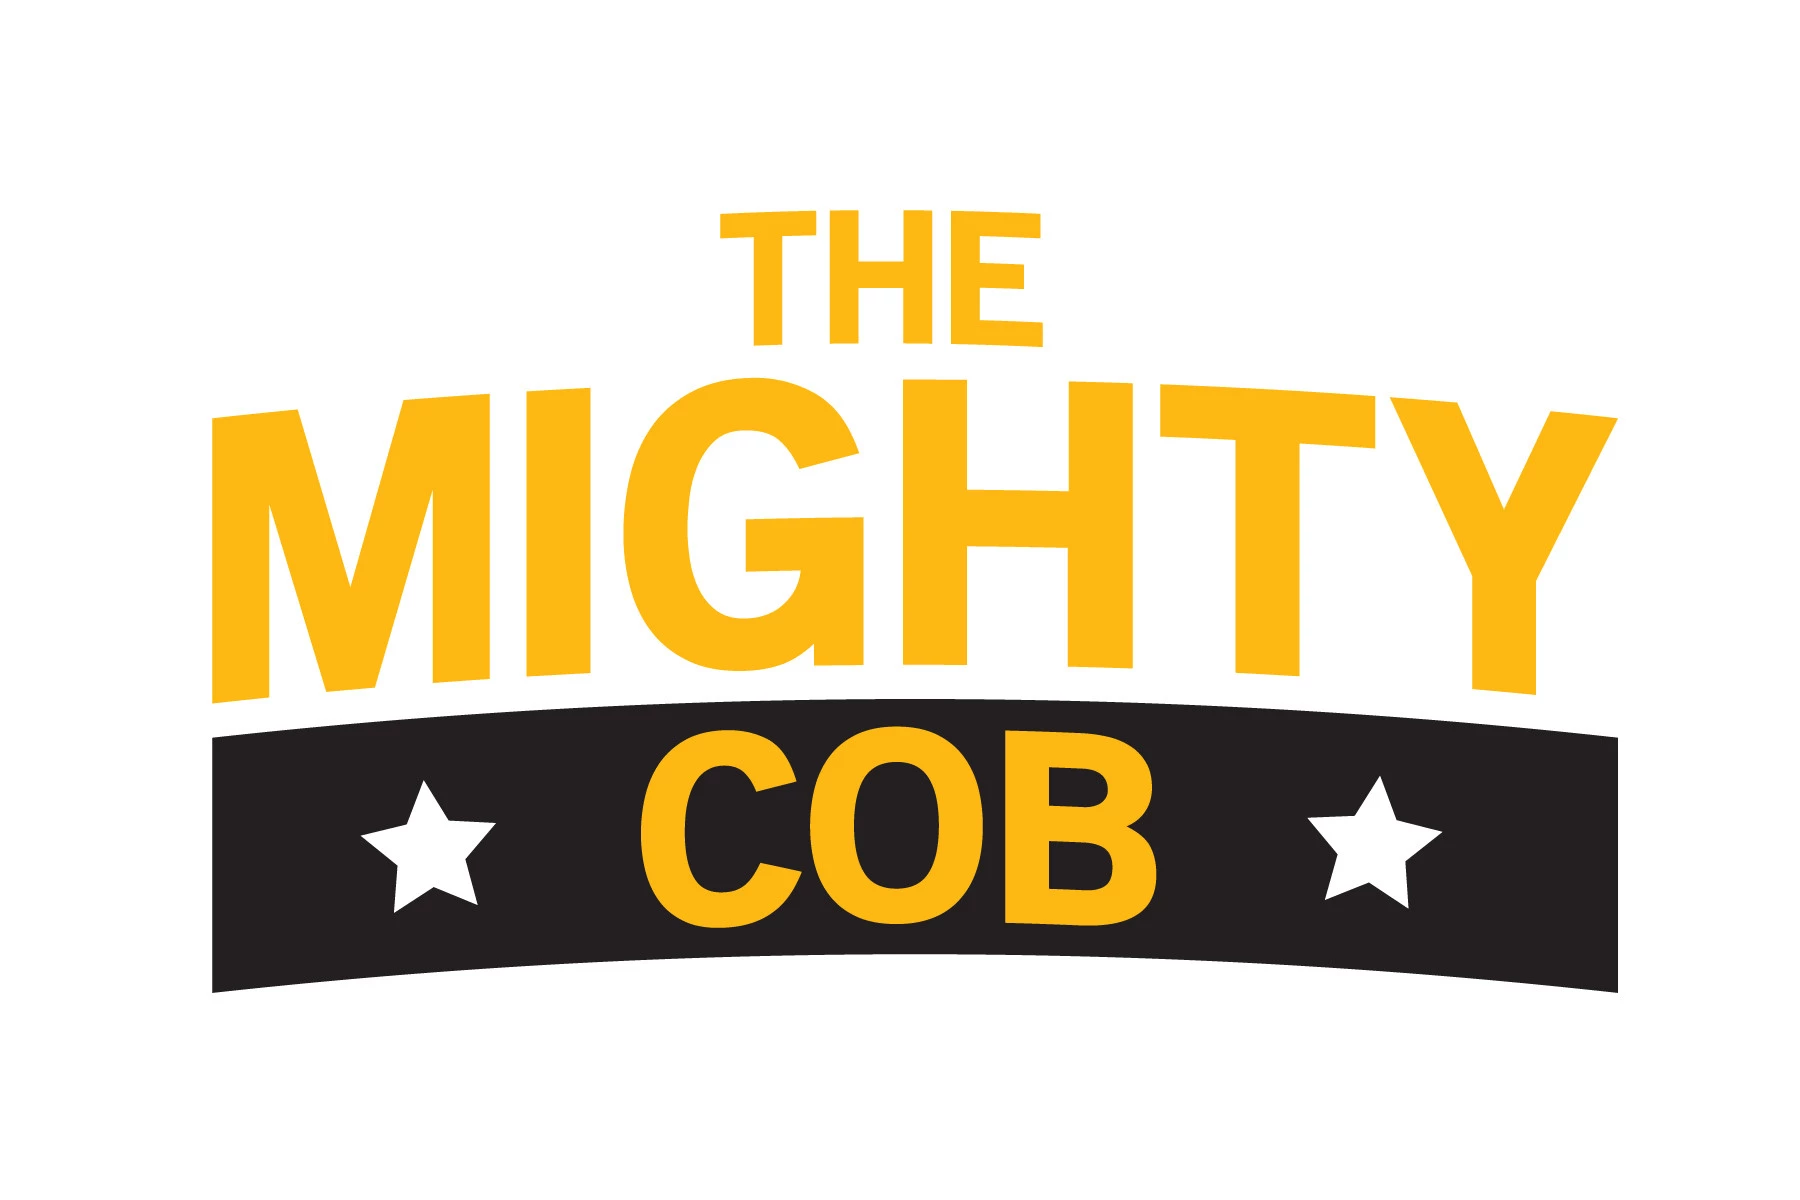 The Mighty Cob